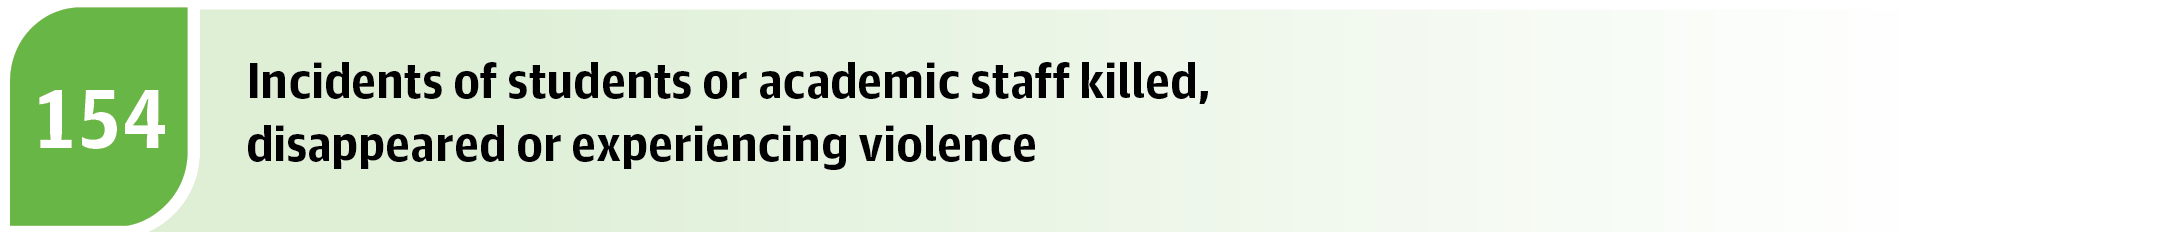 Incidents of students or academic staff killed, disappeared or experiencing violence